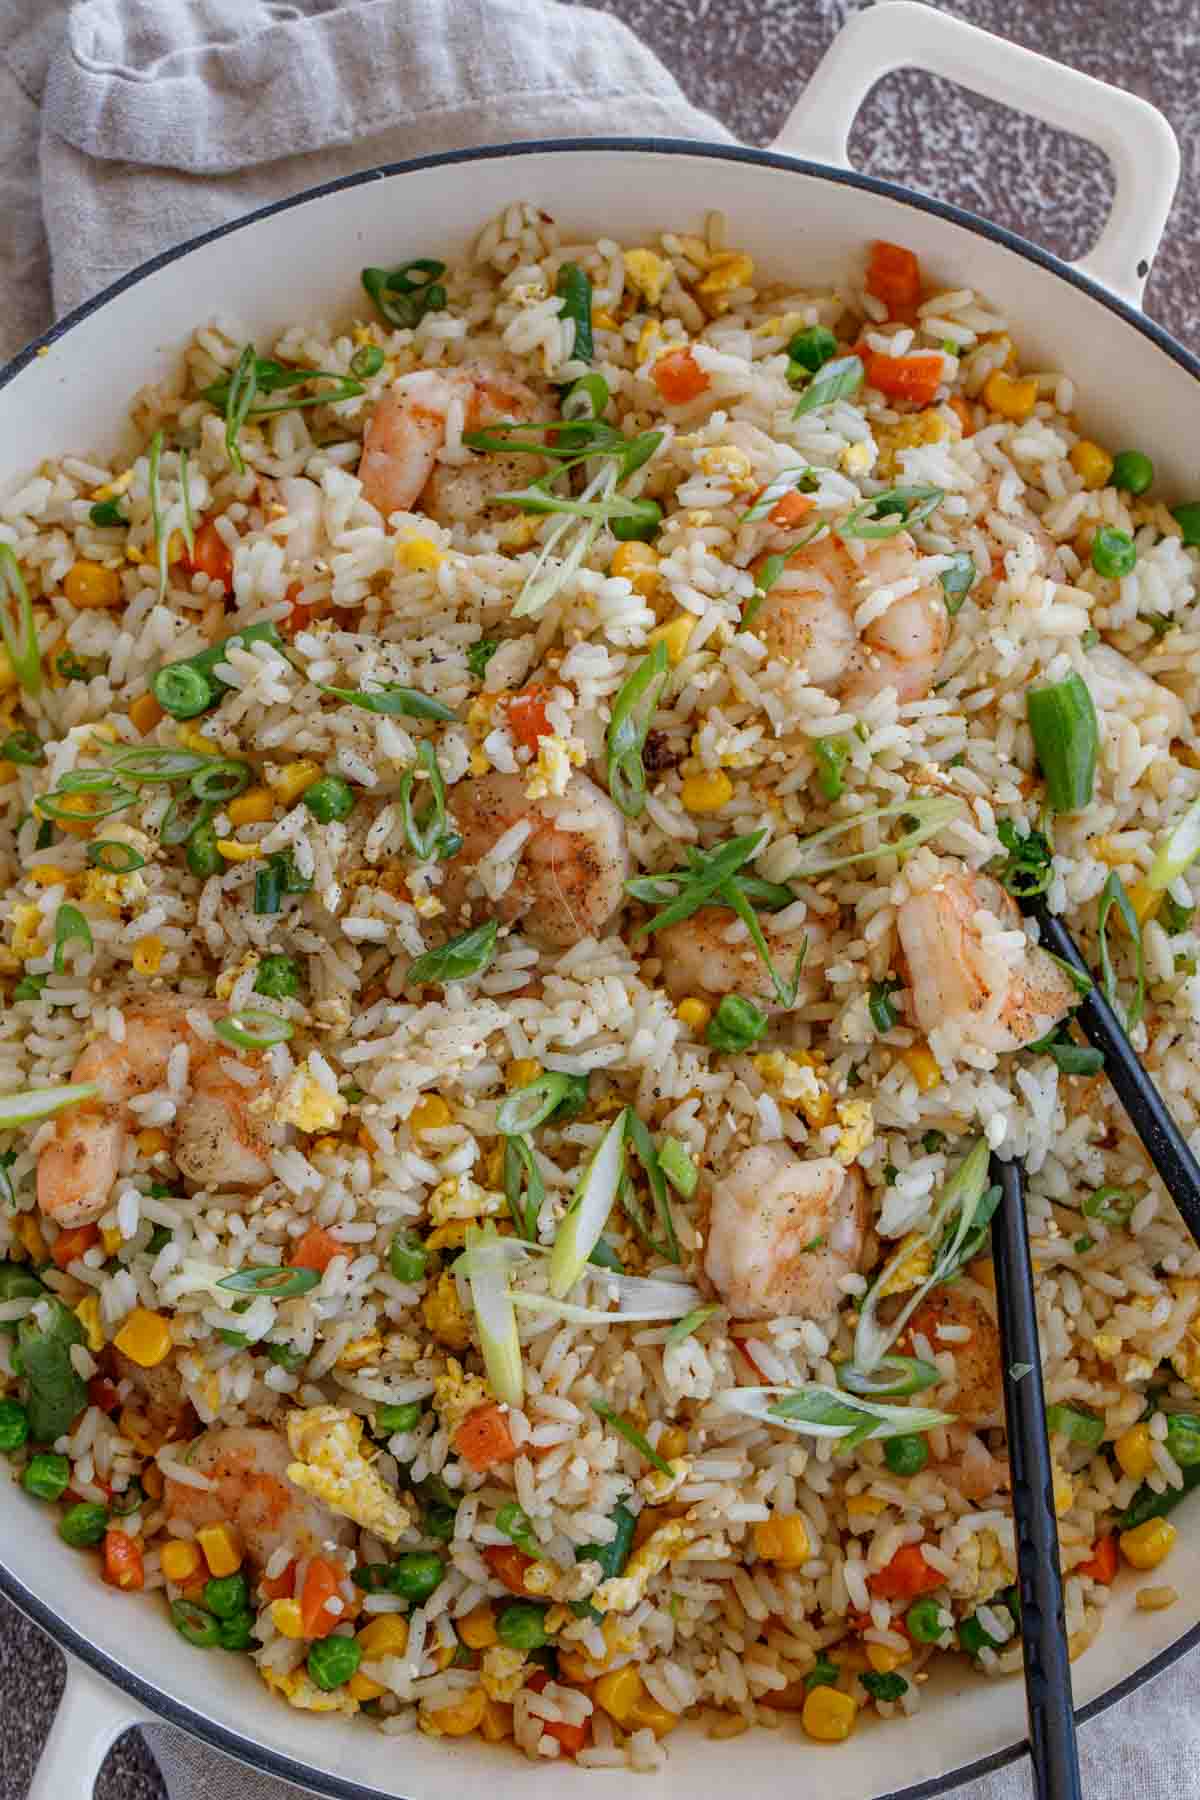 Shrimp fried rice topped with greens.